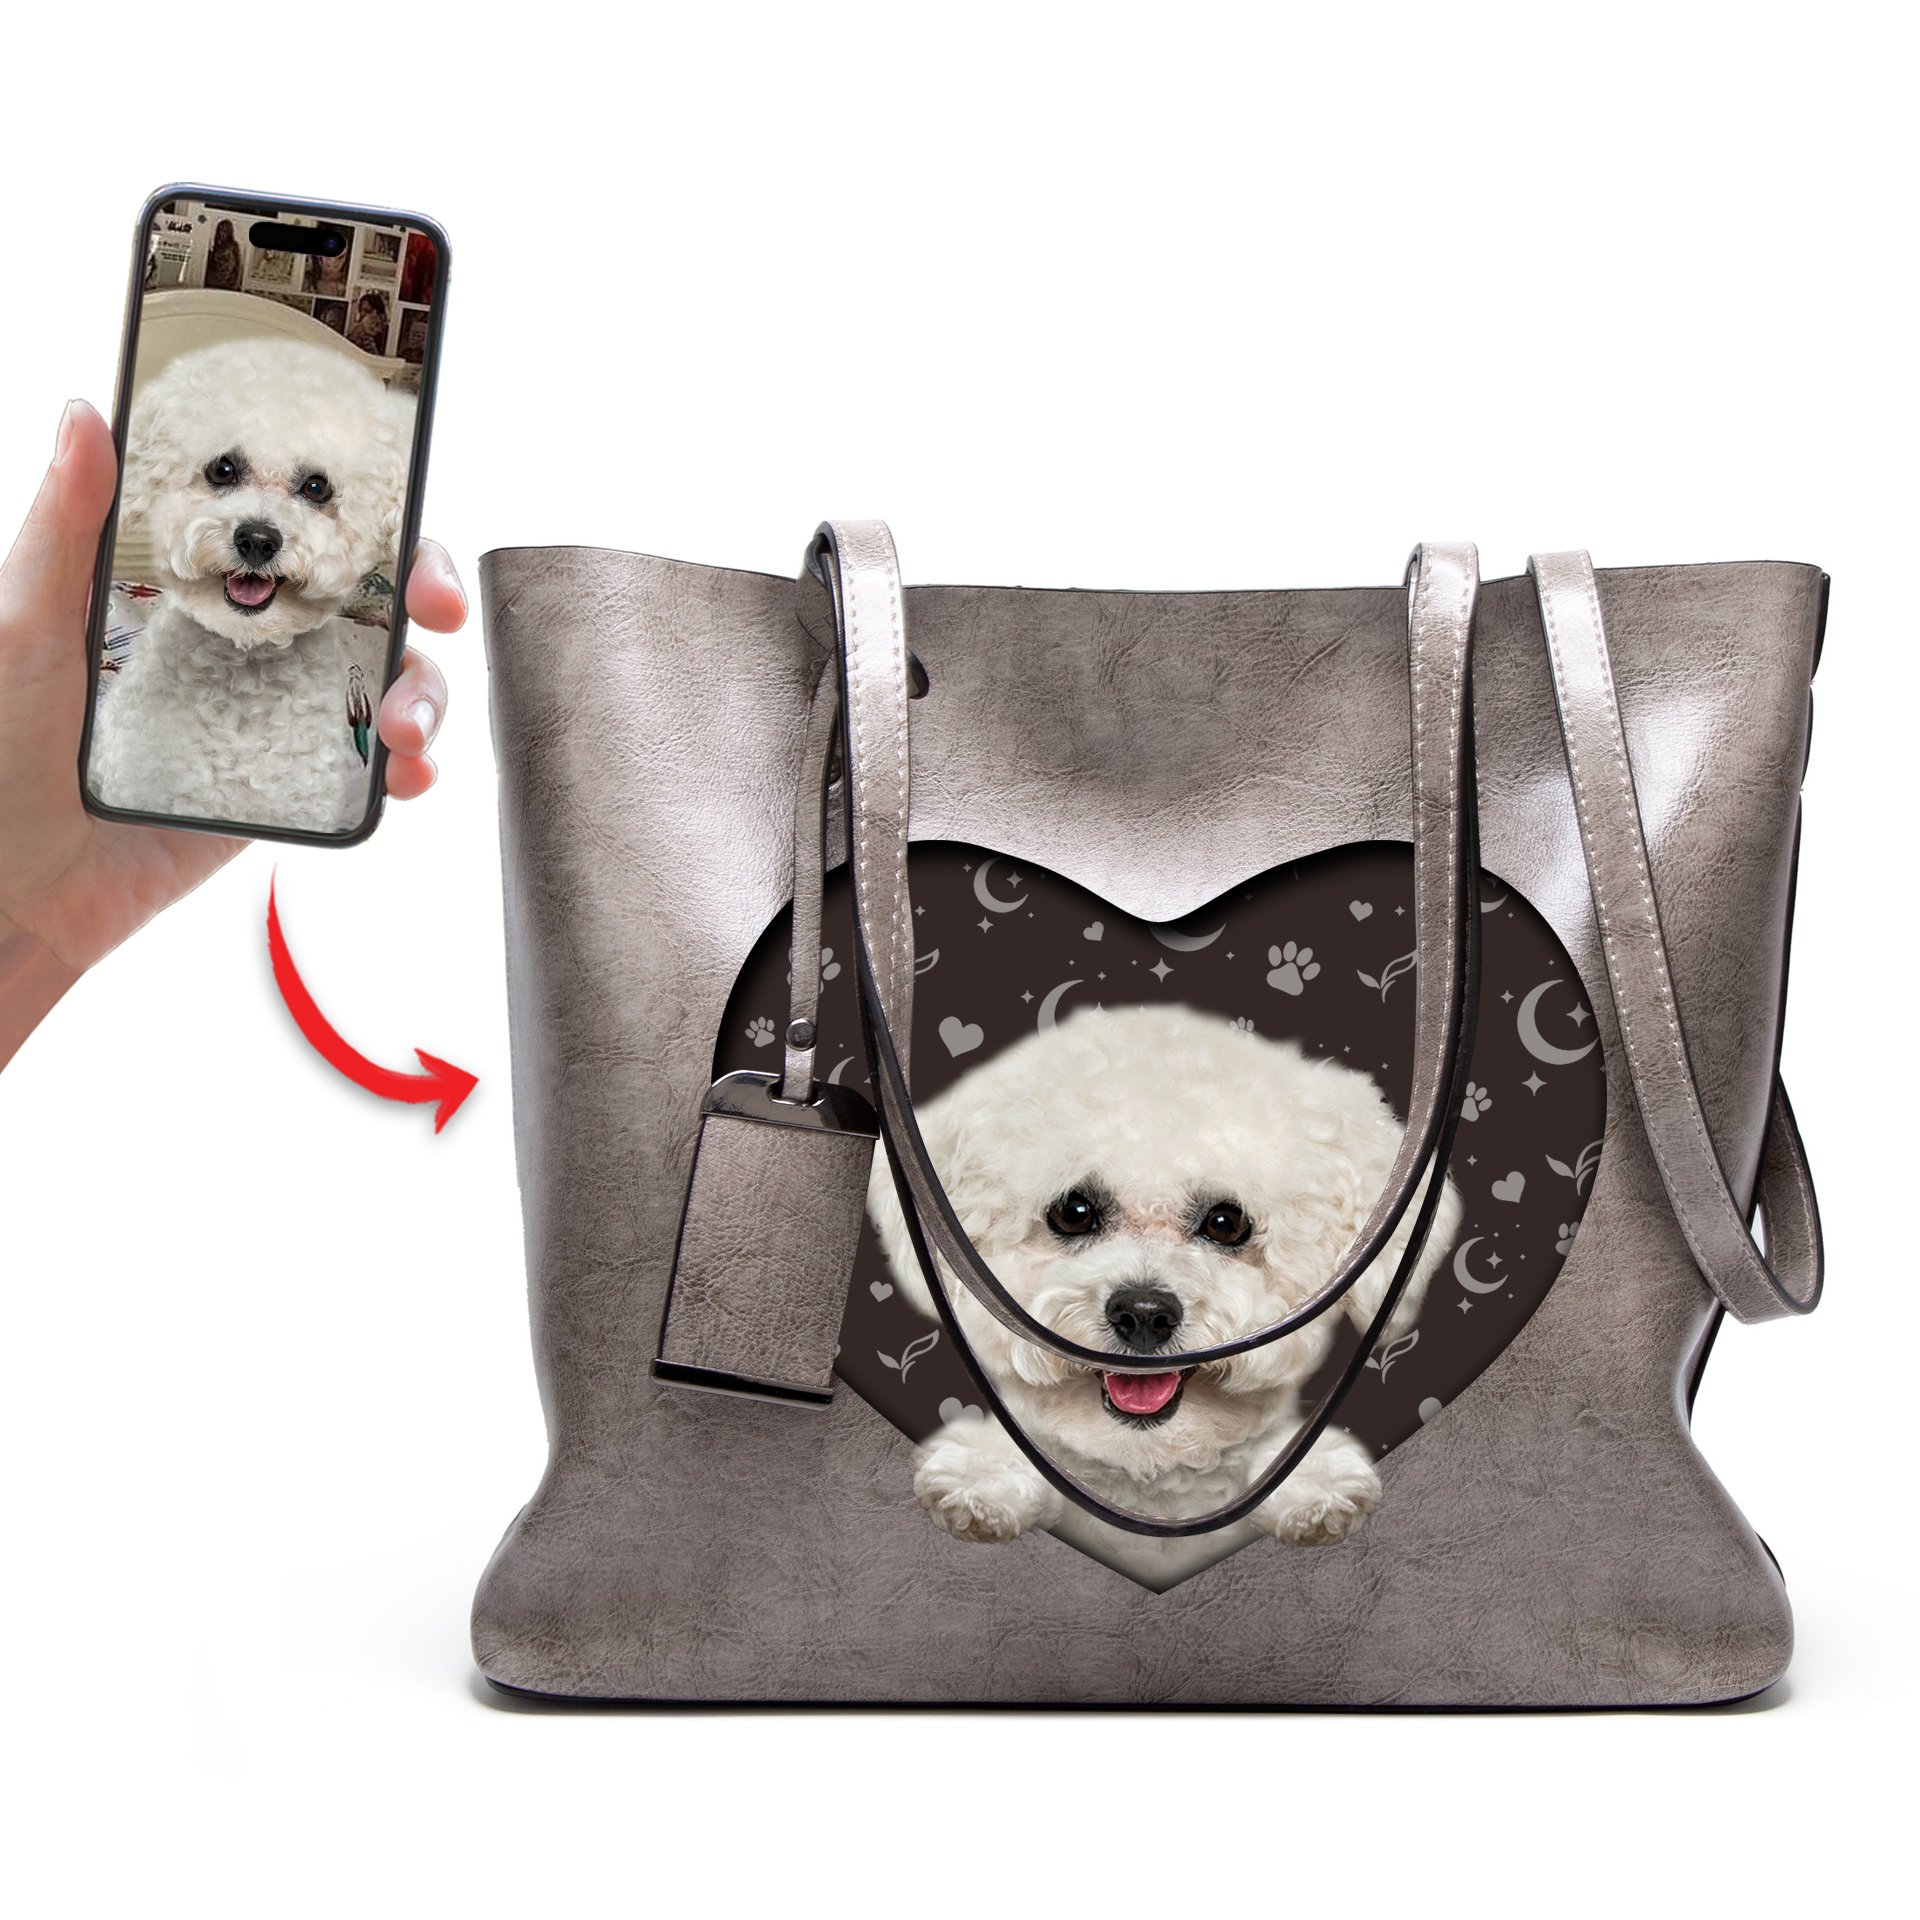 I Know I'm Cute - Personalized Glamour Handbag With Your Photo - 11